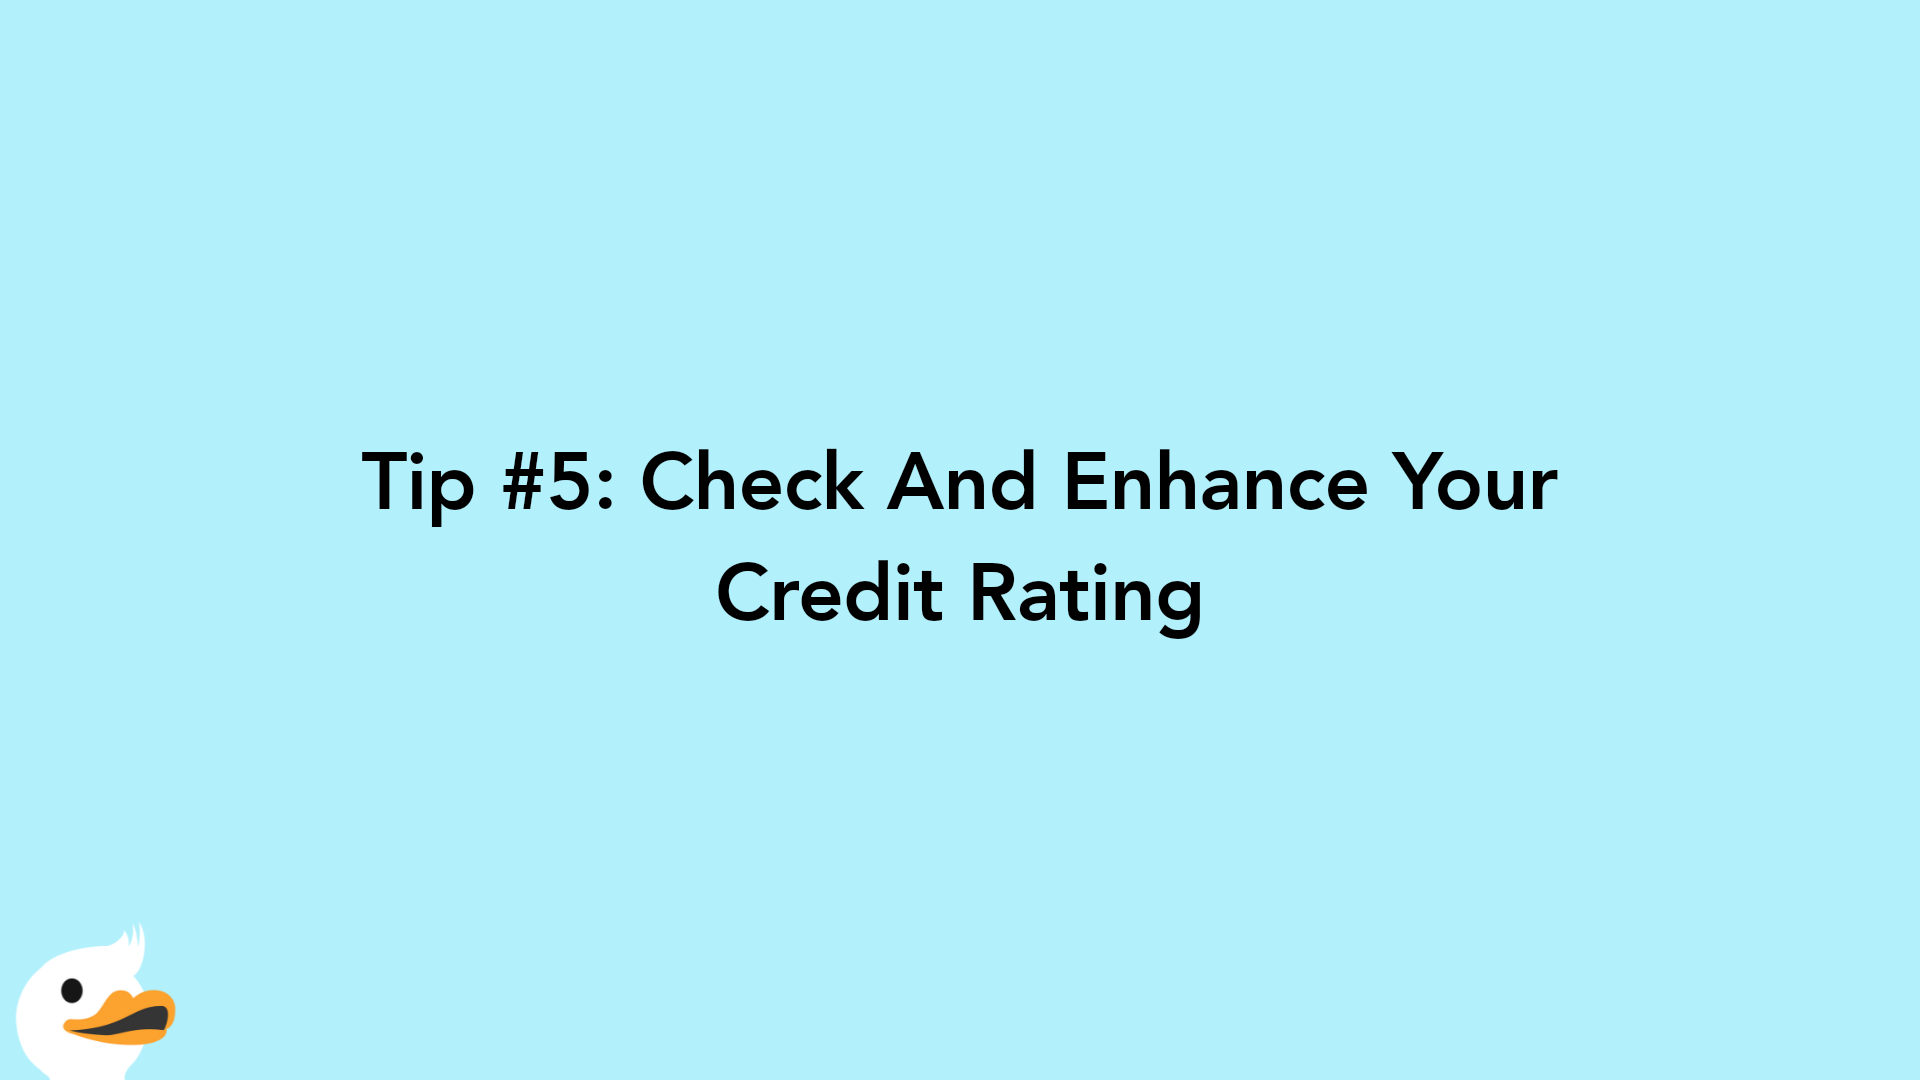 Tip #5: Check And Enhance Your Credit Rating